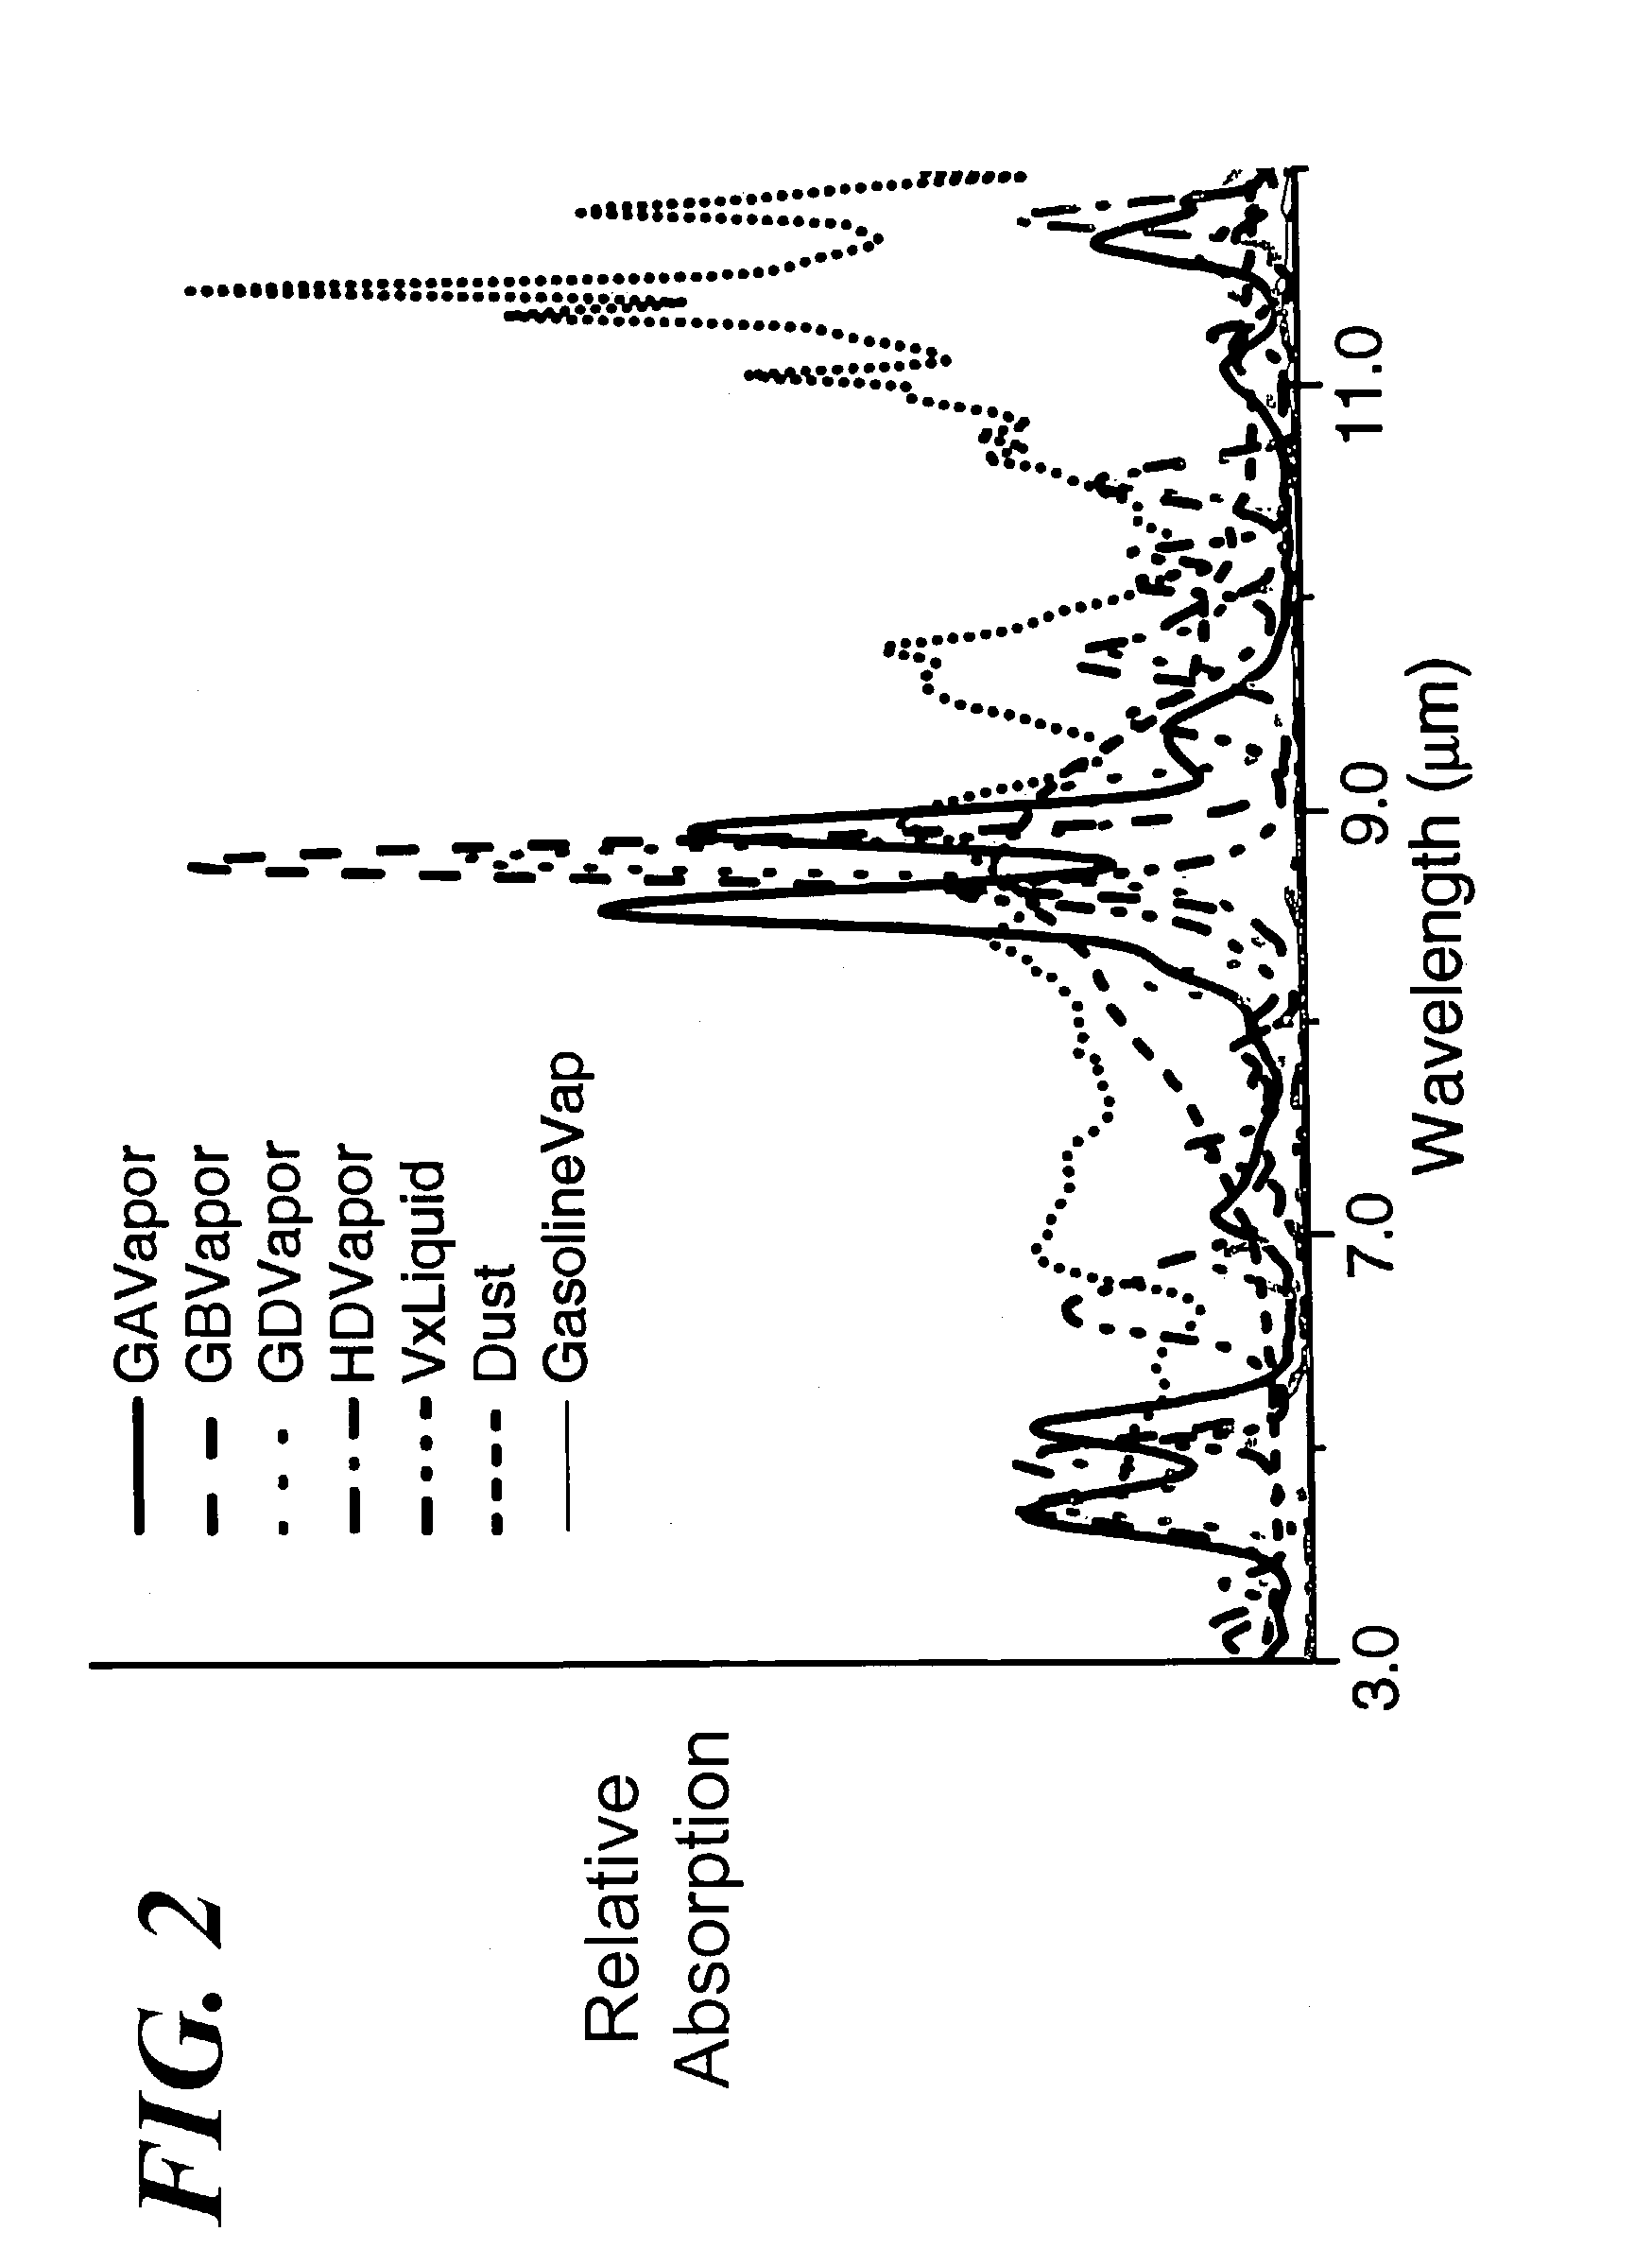 Air sampling method and sensor system for spectroscopic detection and identification of chemical and biological contaminants